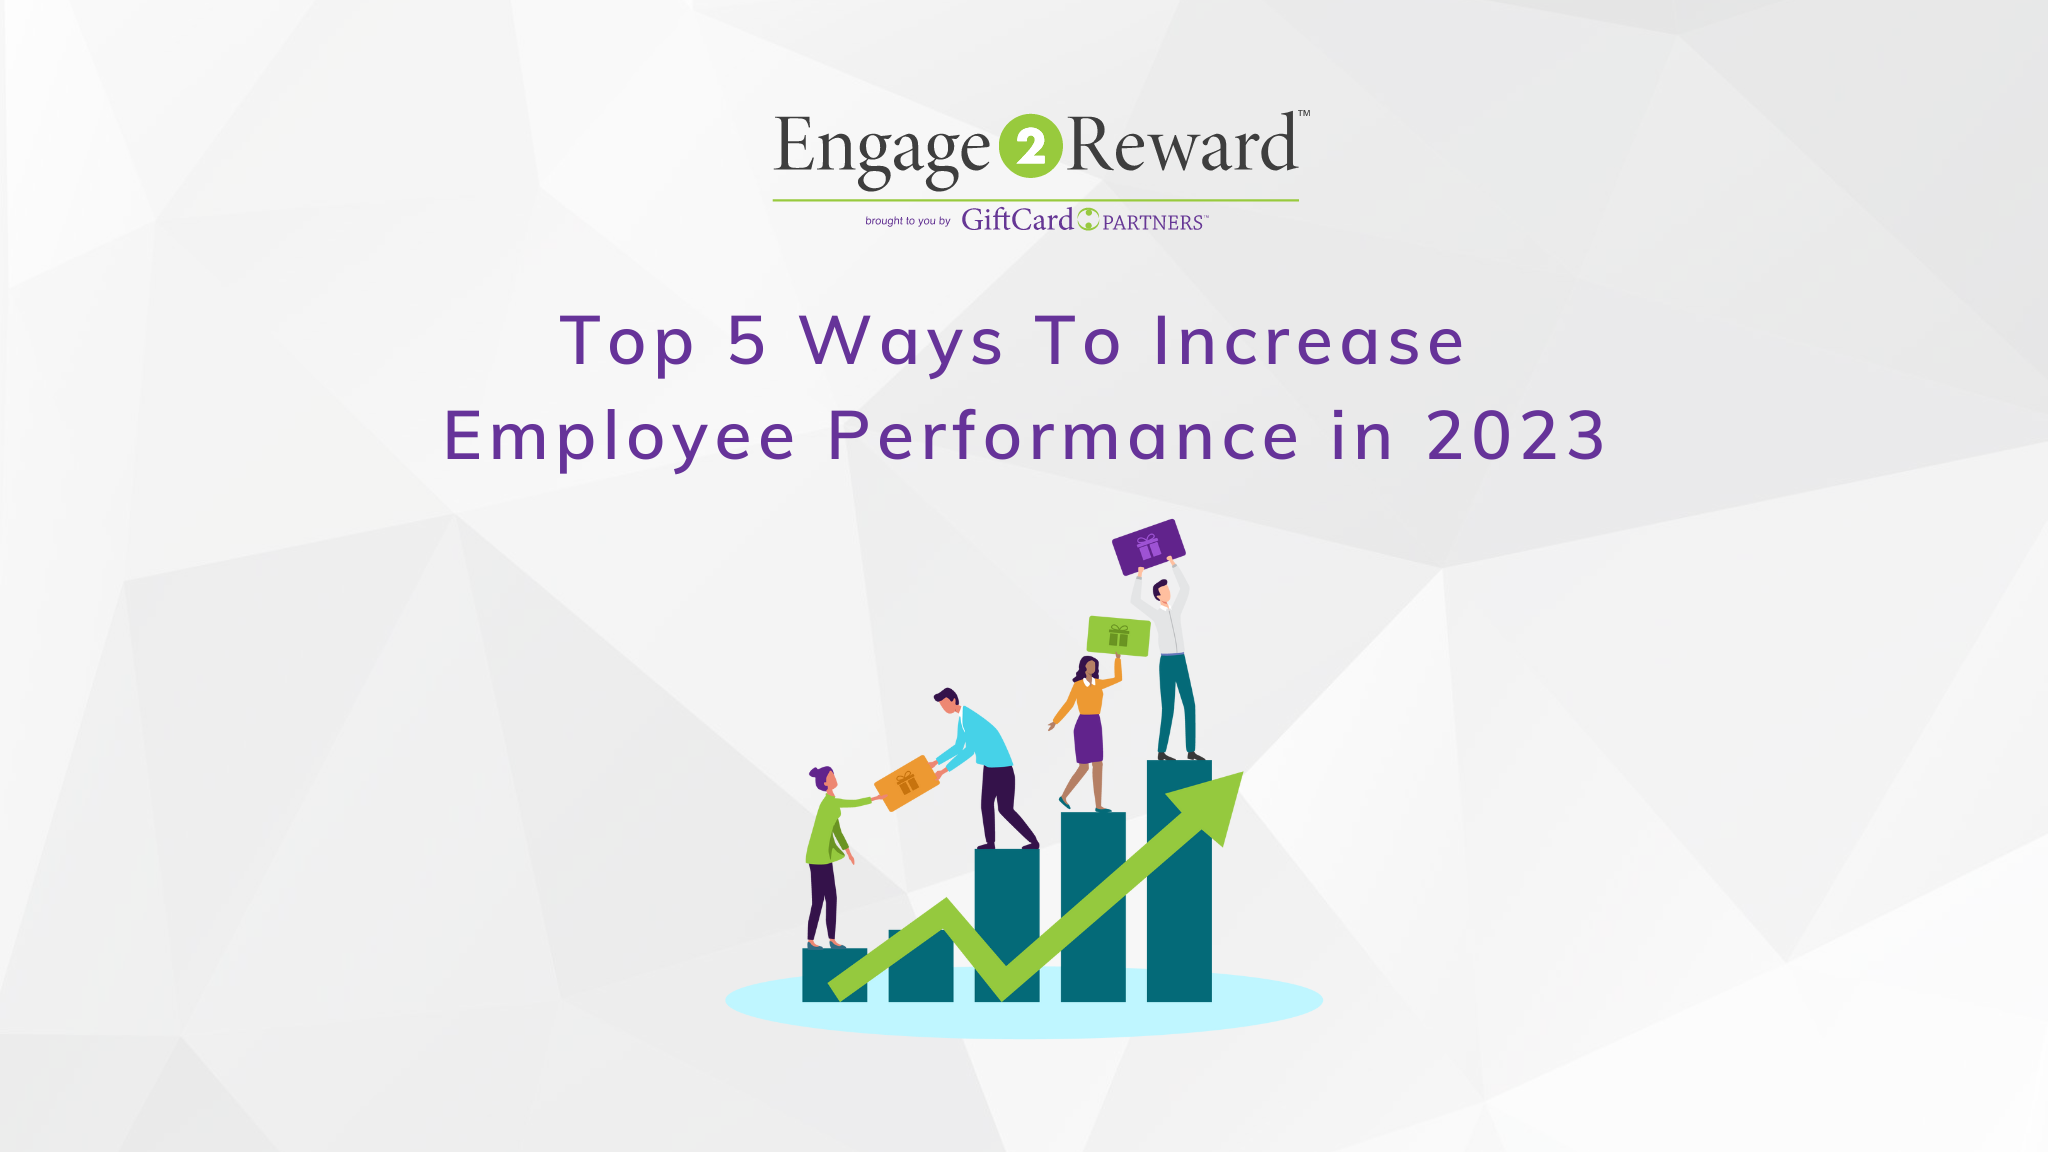 Top 5 Ways To Increase Employee Performance in 2023